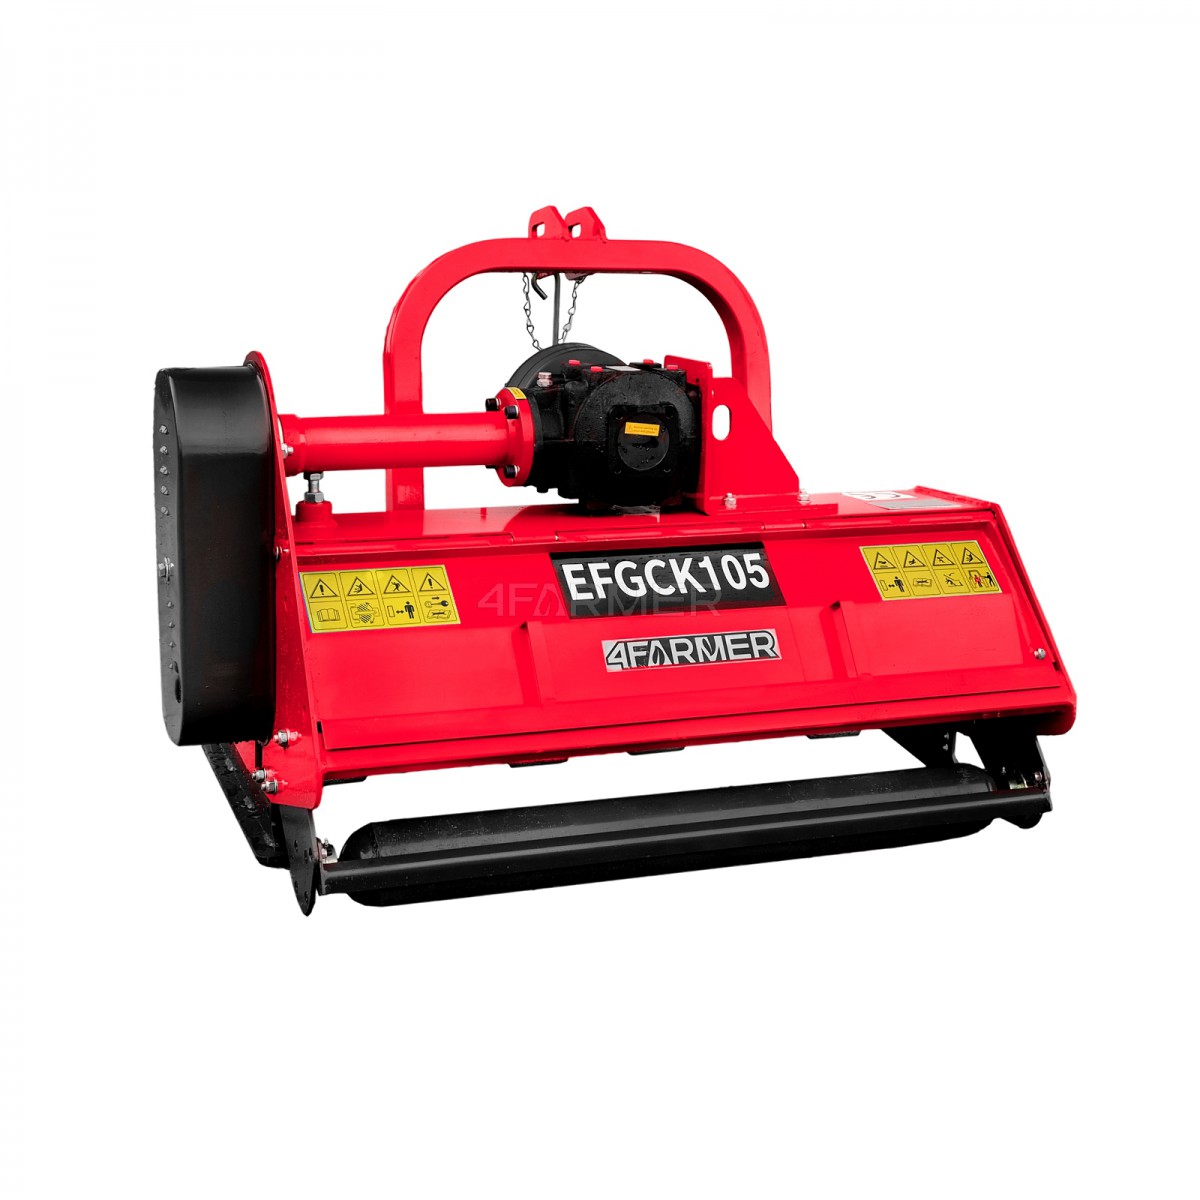 Flail mower EFGC-K 105 with opening 4FARMER hatch - red